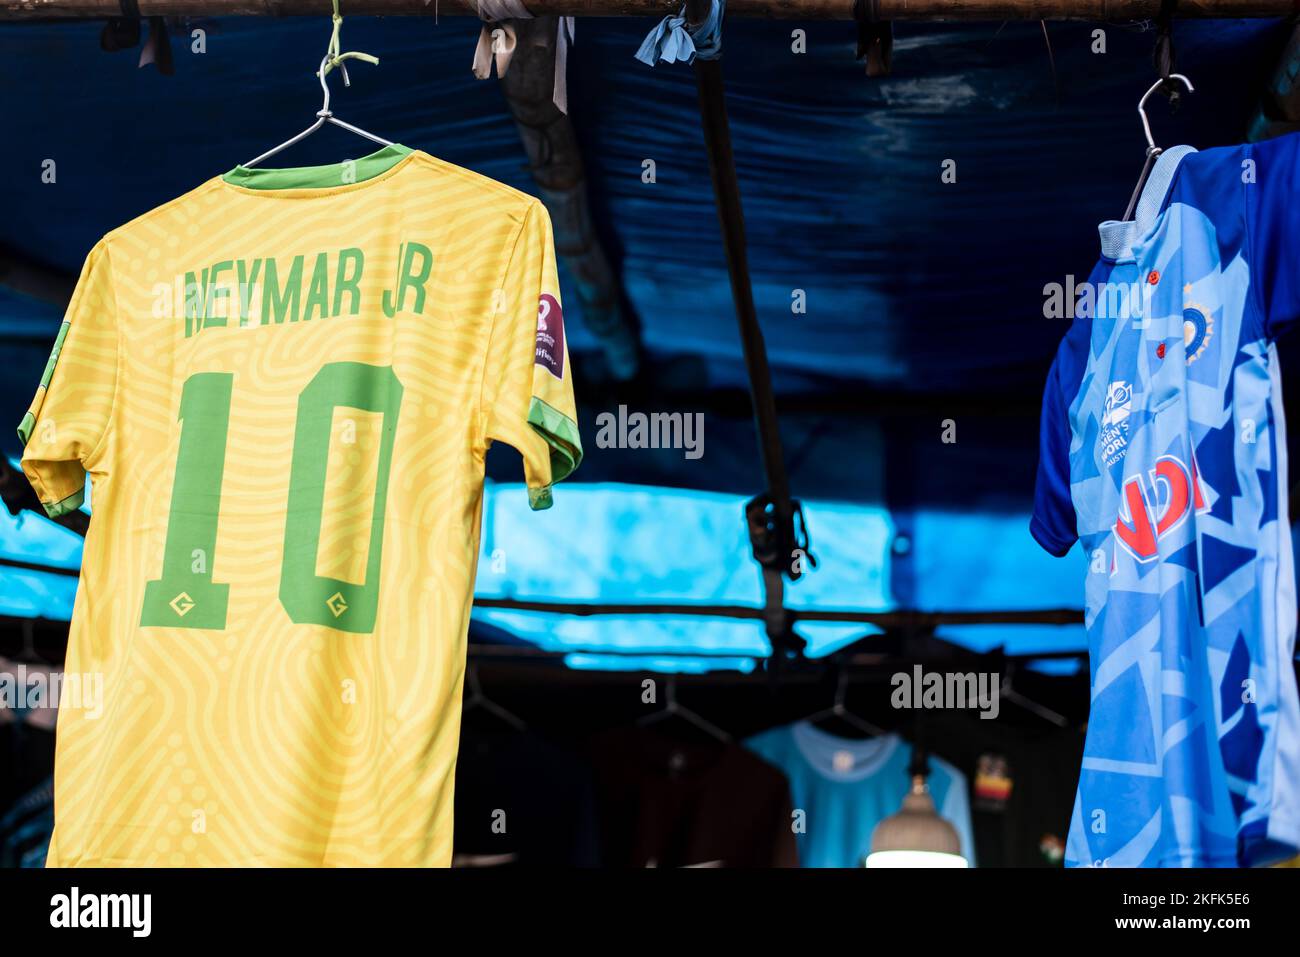 Calcutta, India - November 15, 2022. Soccer jerseys of Neymar is hanging in a retail shop to sell. Stock Photo